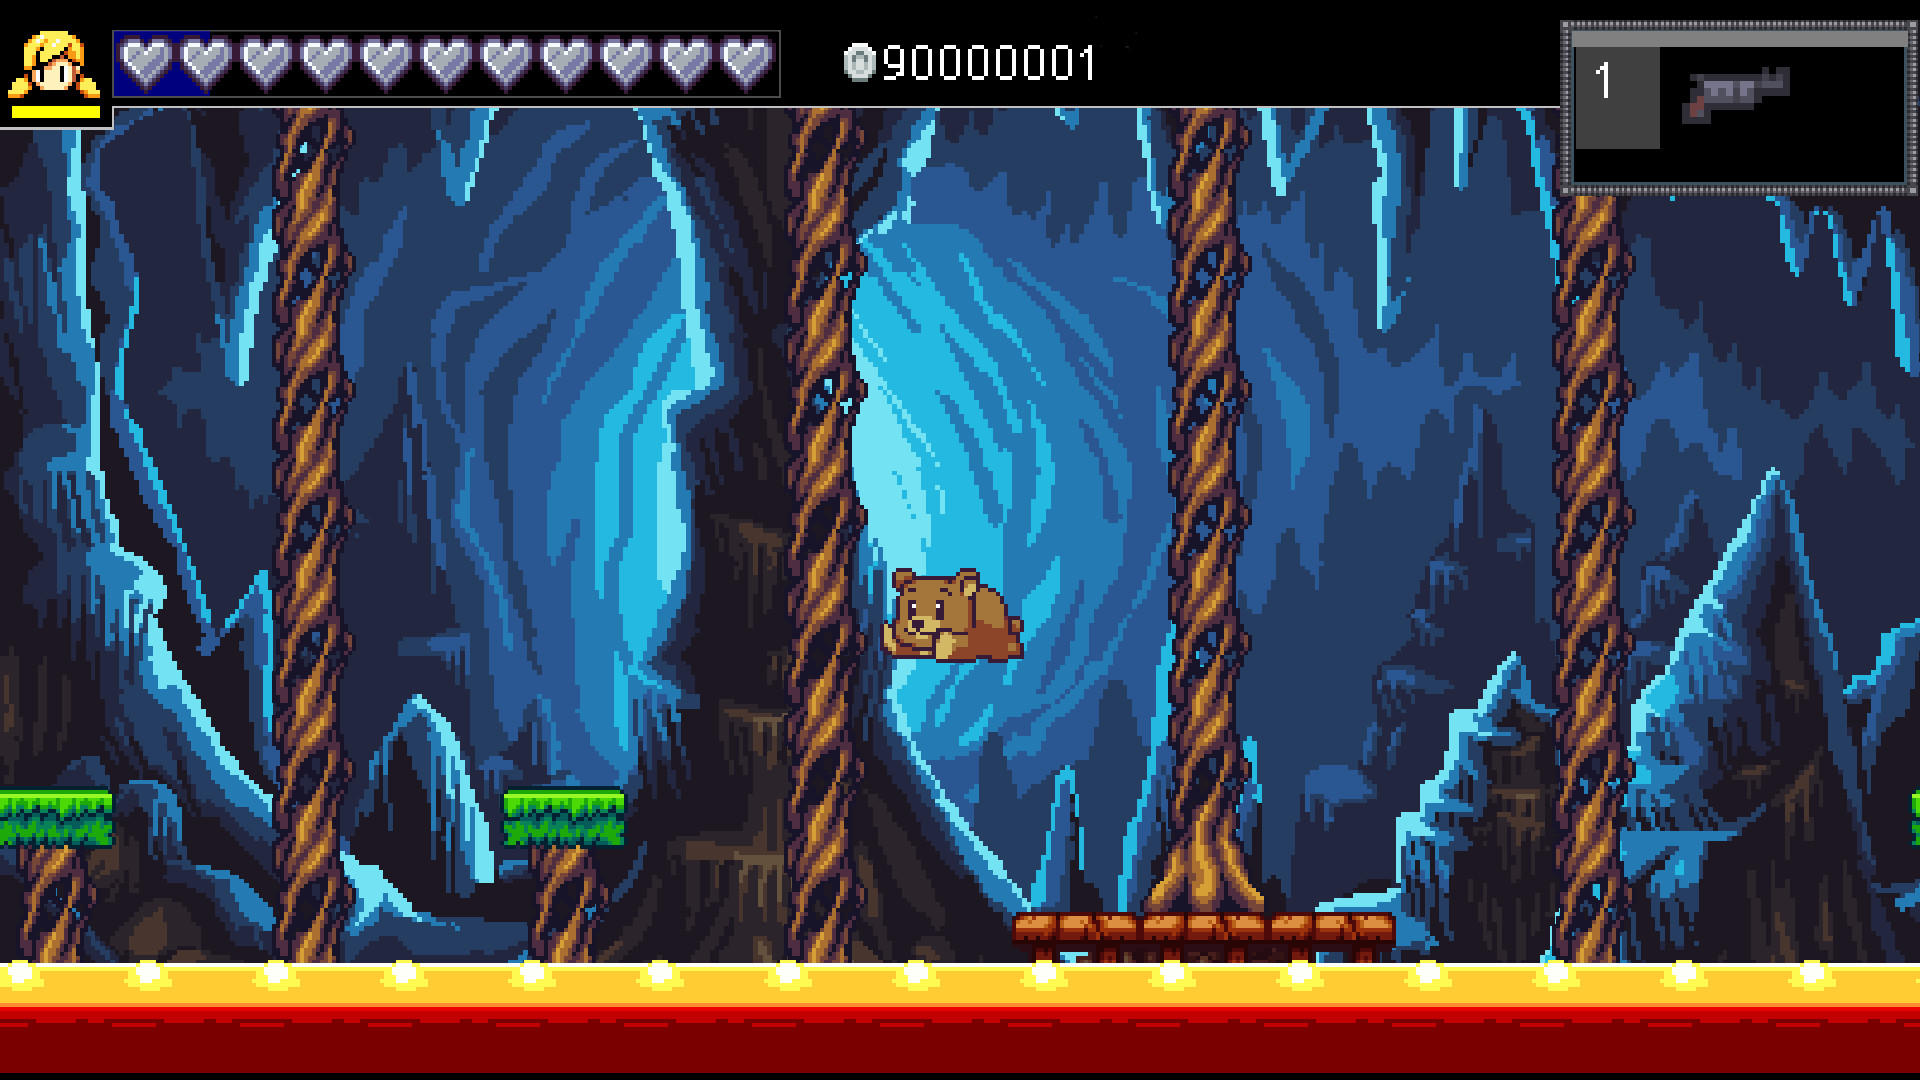 Cally's Caves 3 - Soundtrack Featured Screenshot #1